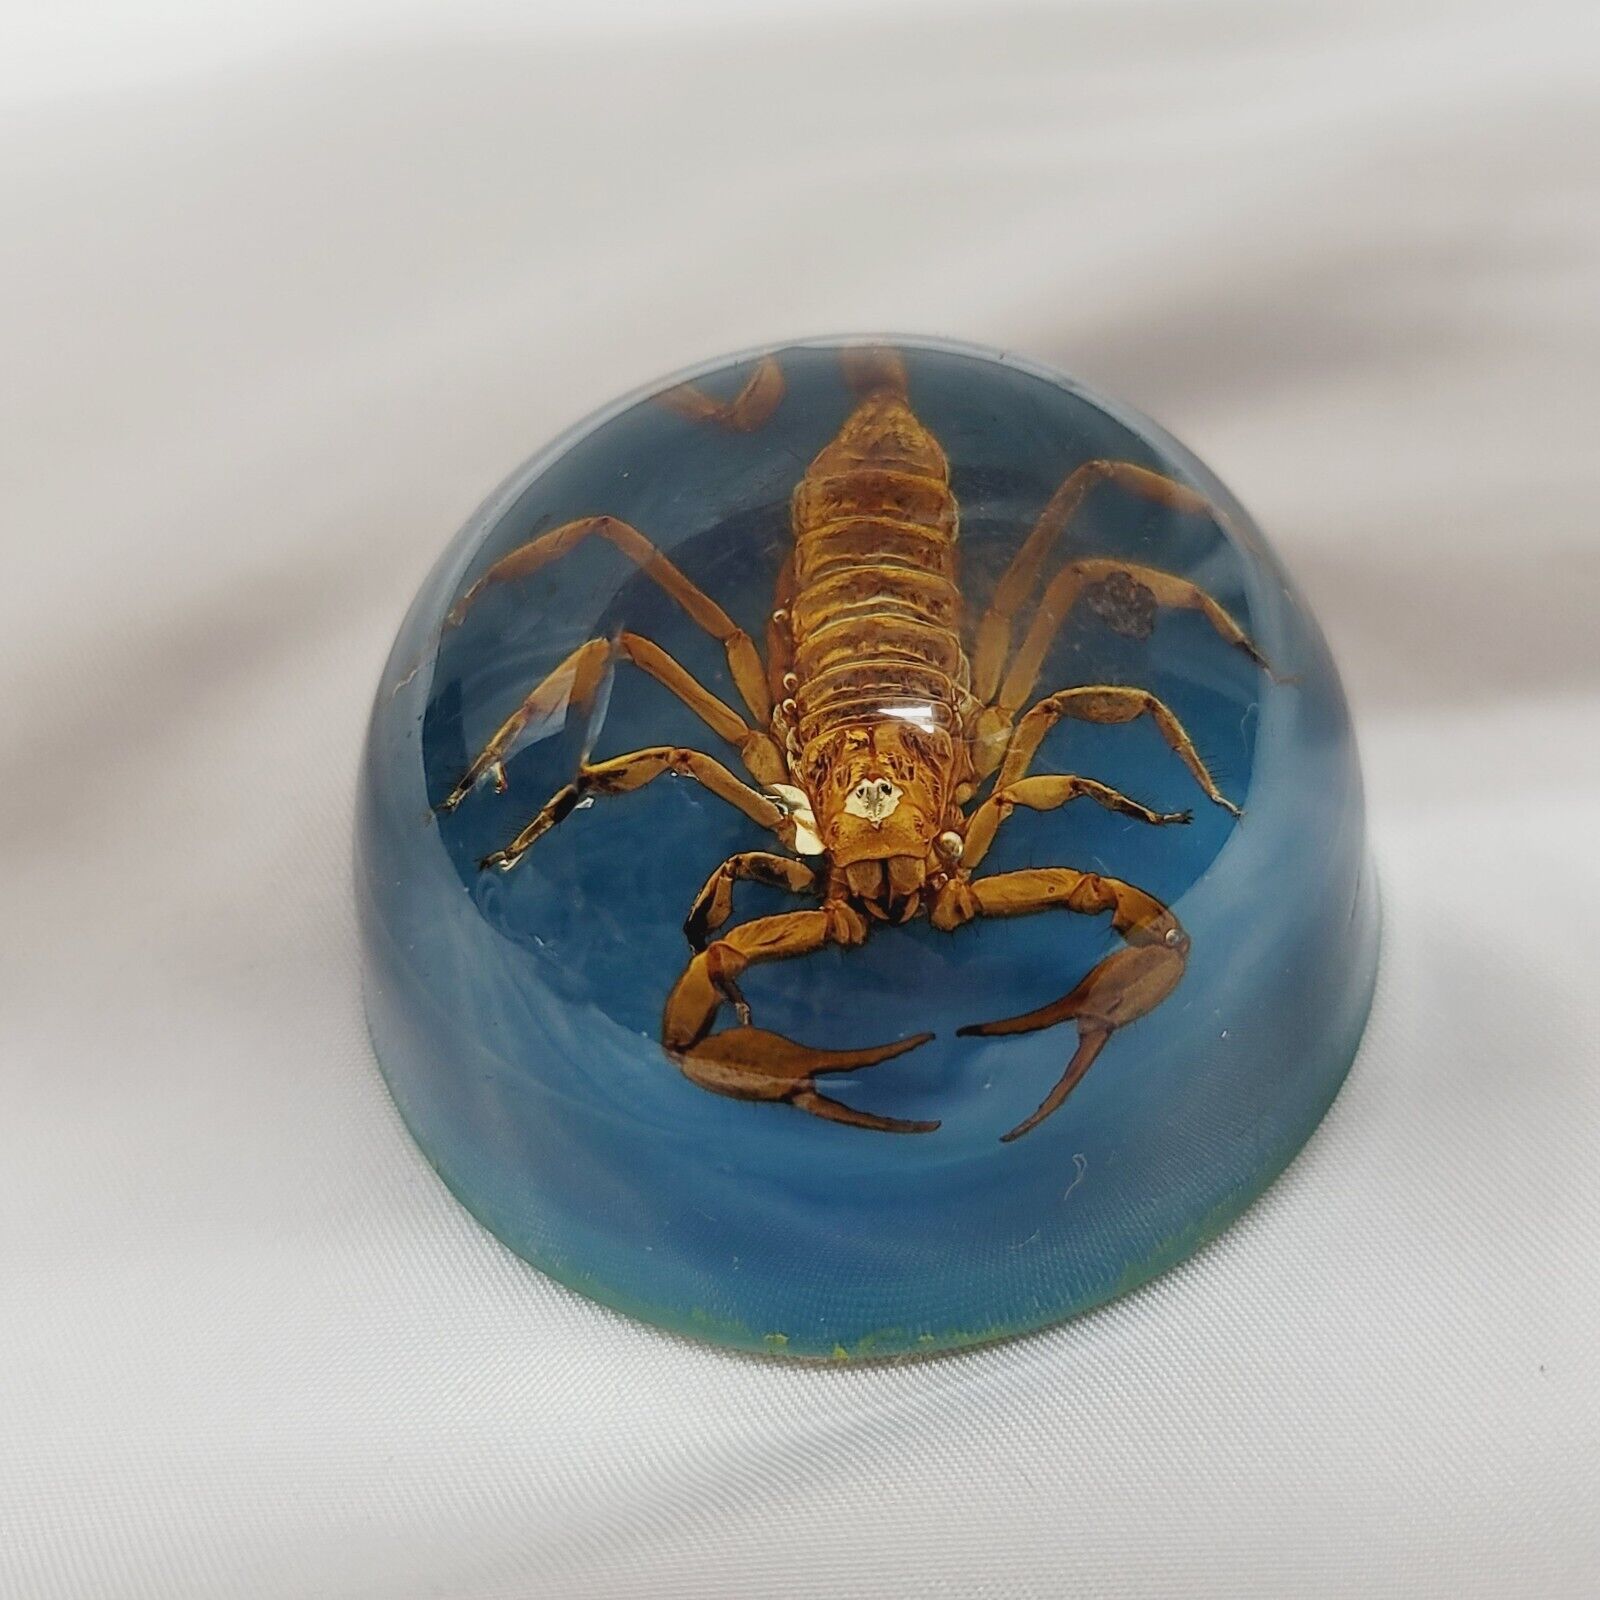 VINTAGE REAL SCORPION ROUND DOME ACRYLIC LUCITE PAPERWEIGHT BLUE FELT BOTTOM 